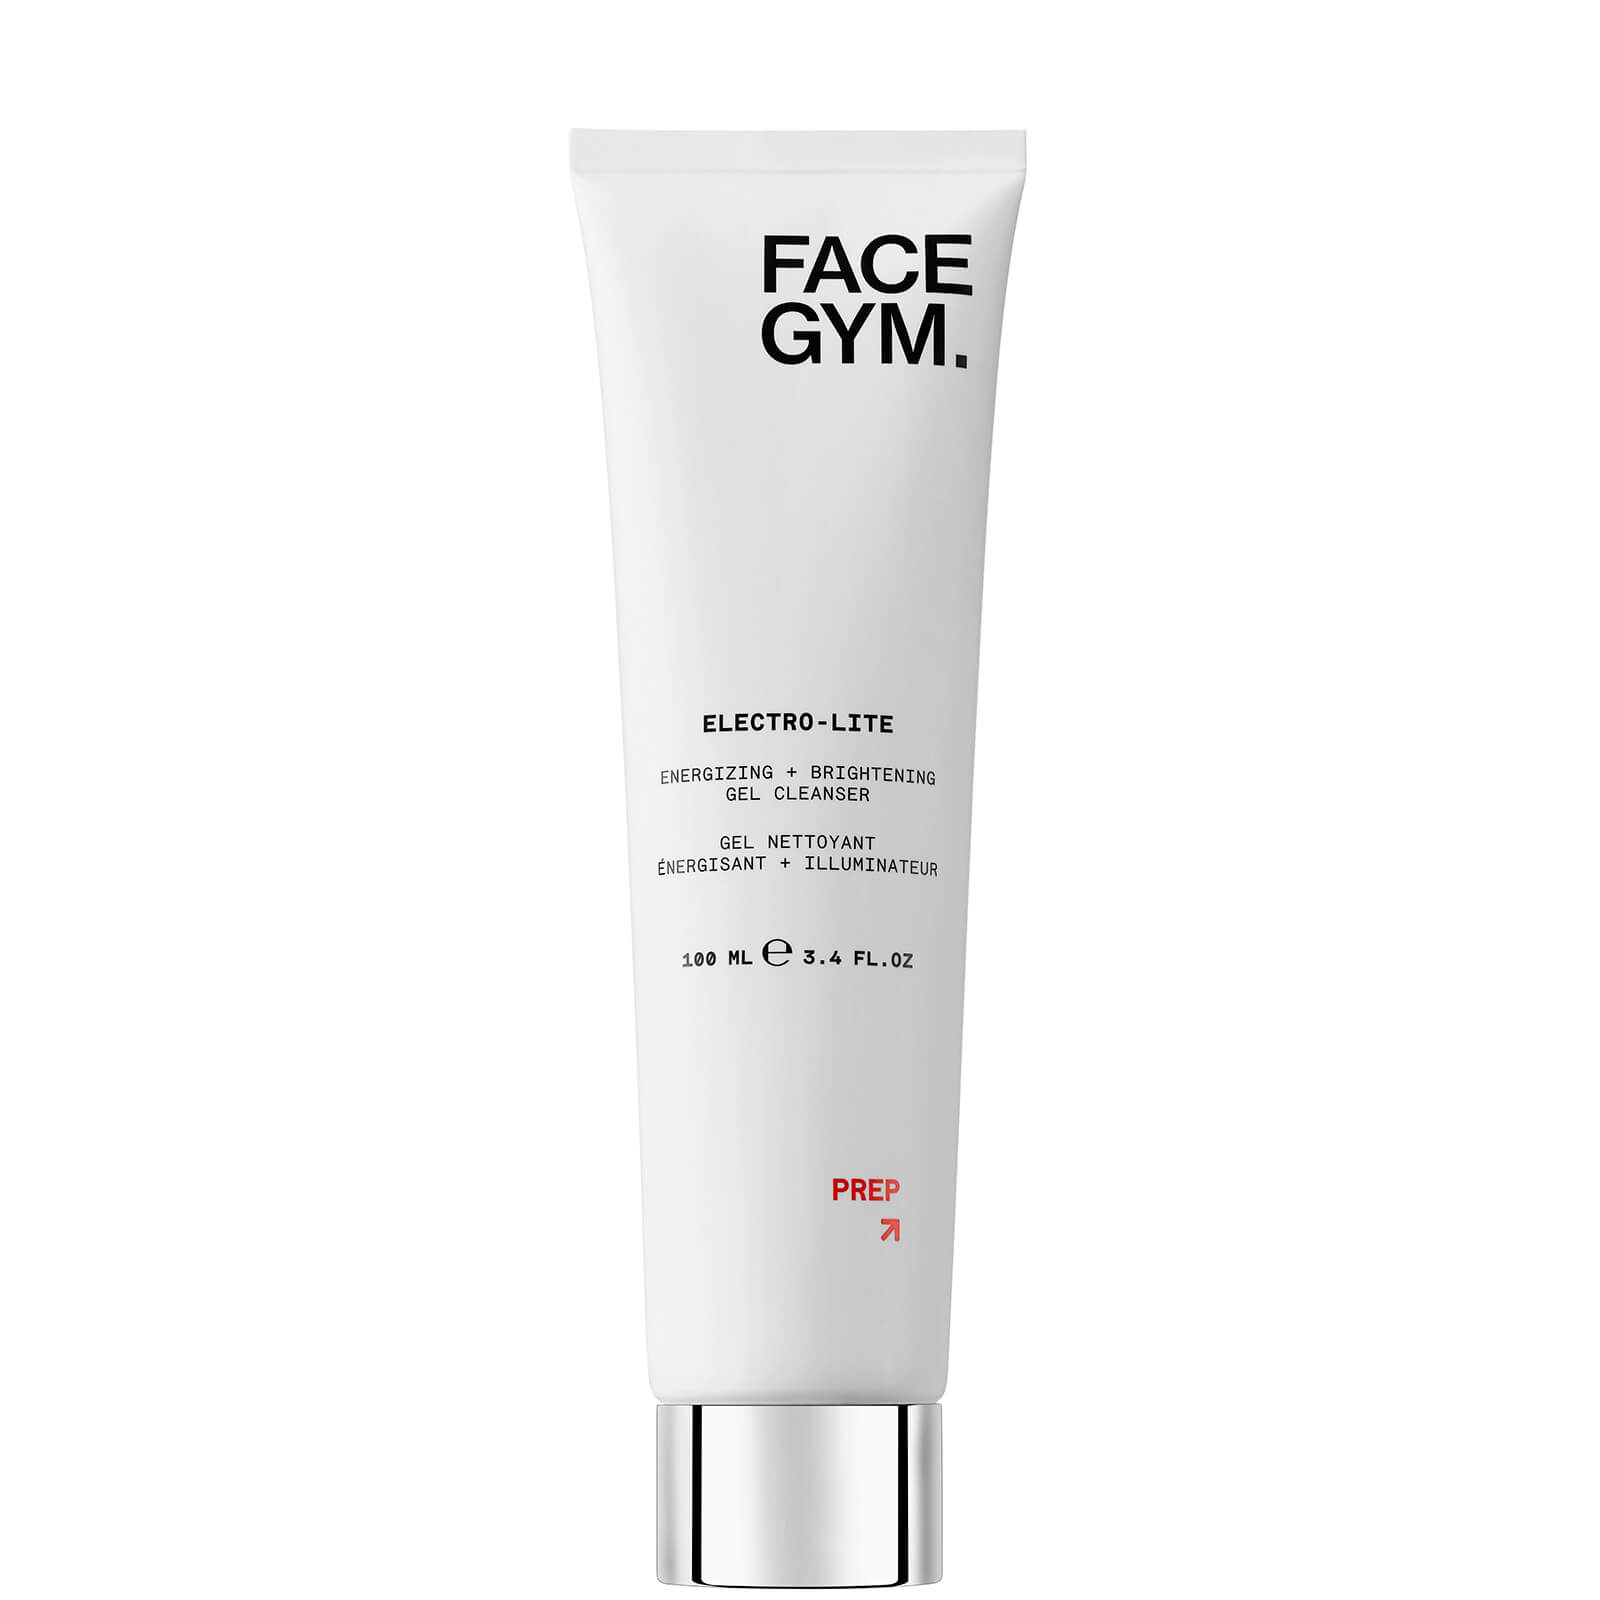 FaceGym Electro-lite Energizing and Brightening Gel Cleanser (Various Sizes) - 100ml